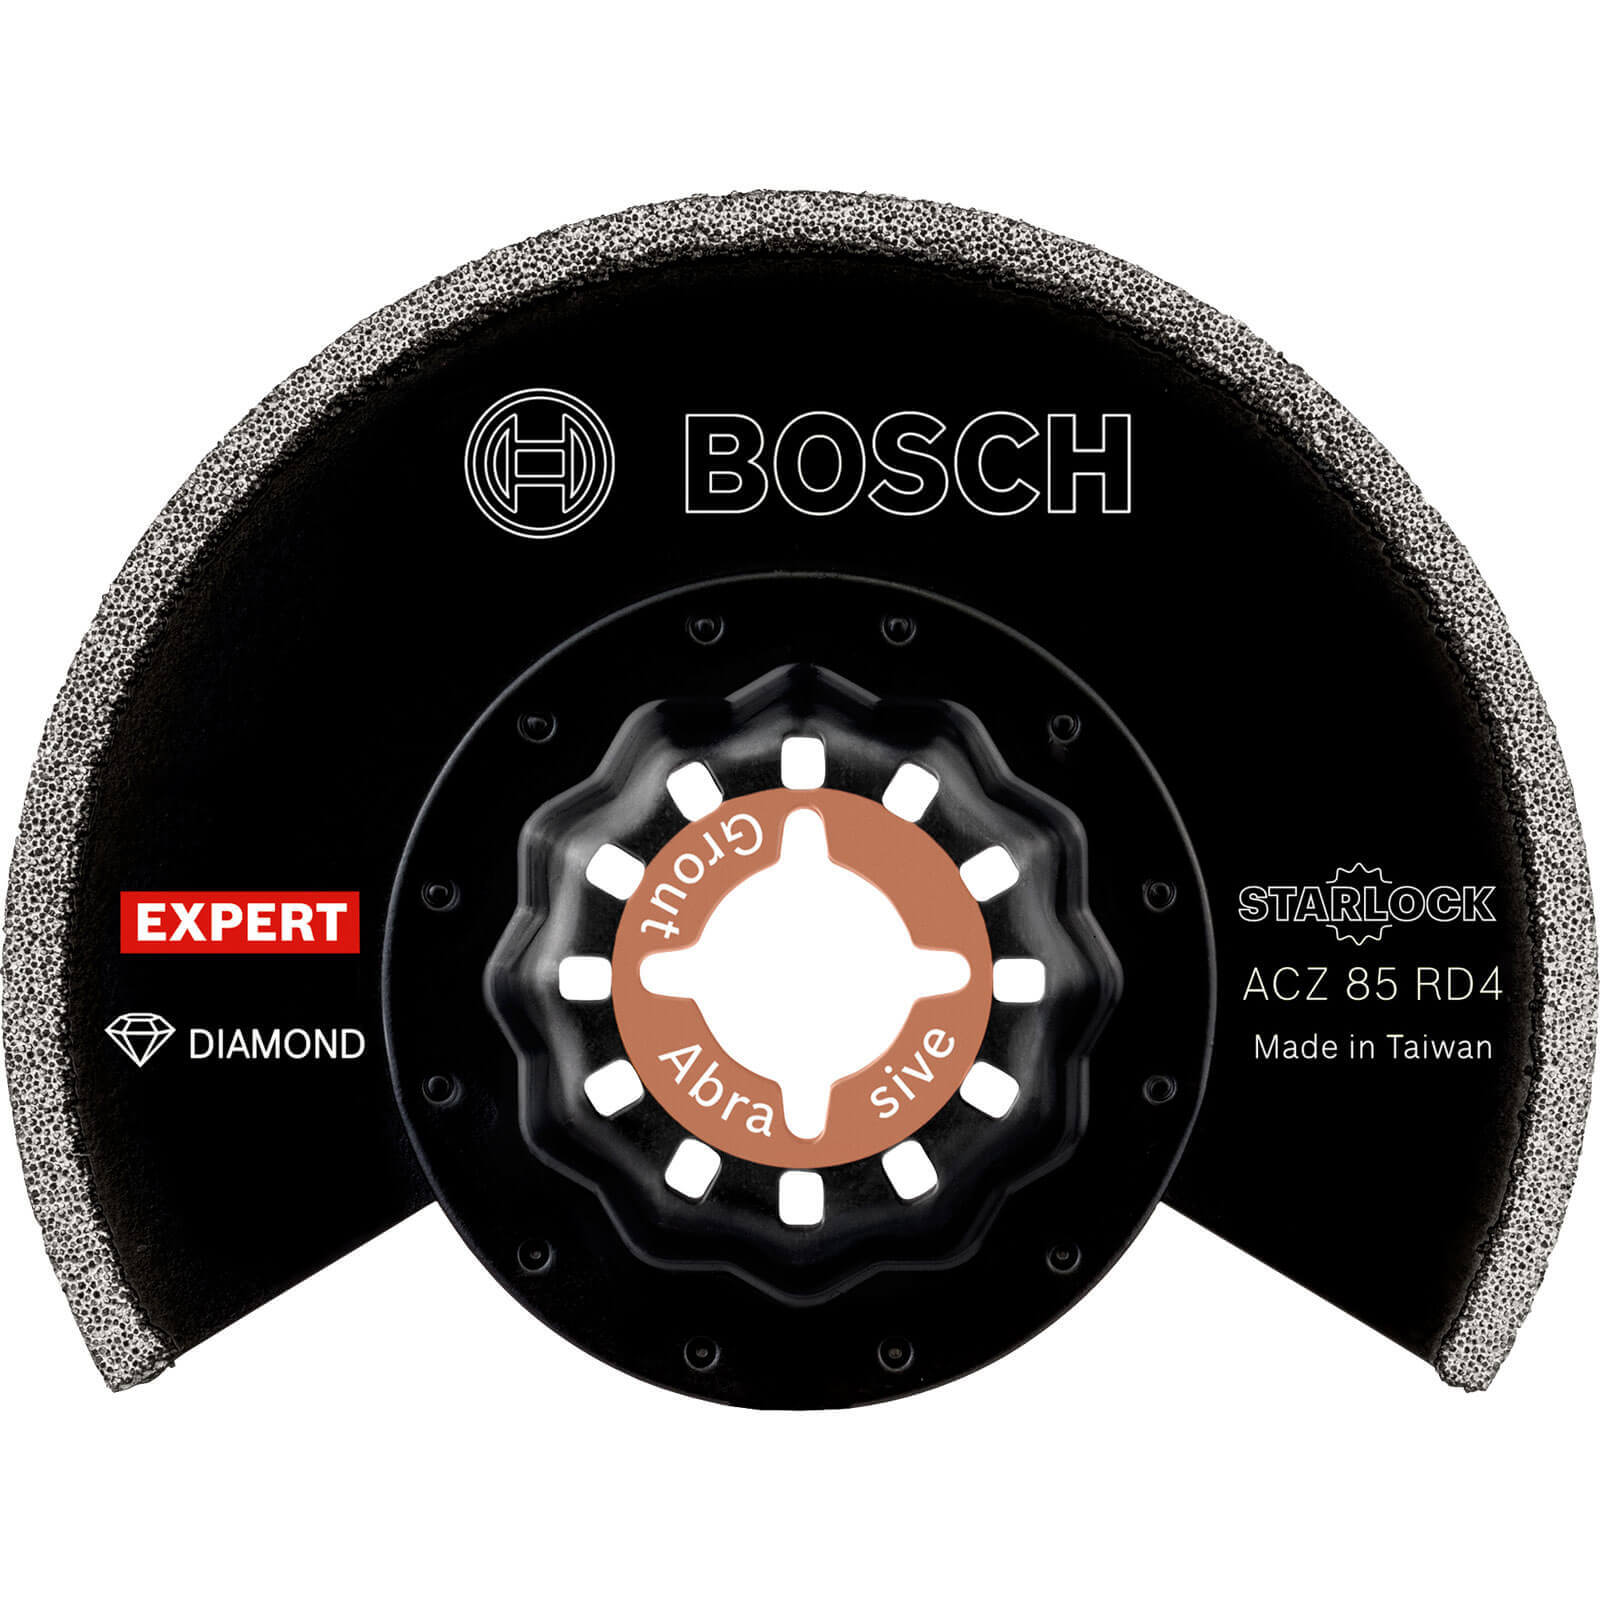 Photo of Bosch Expert Acz 85 Rd4 Abrasive And Grout Oscillating Multi Tool Segment Saw Blade 85mm Pack Of 10